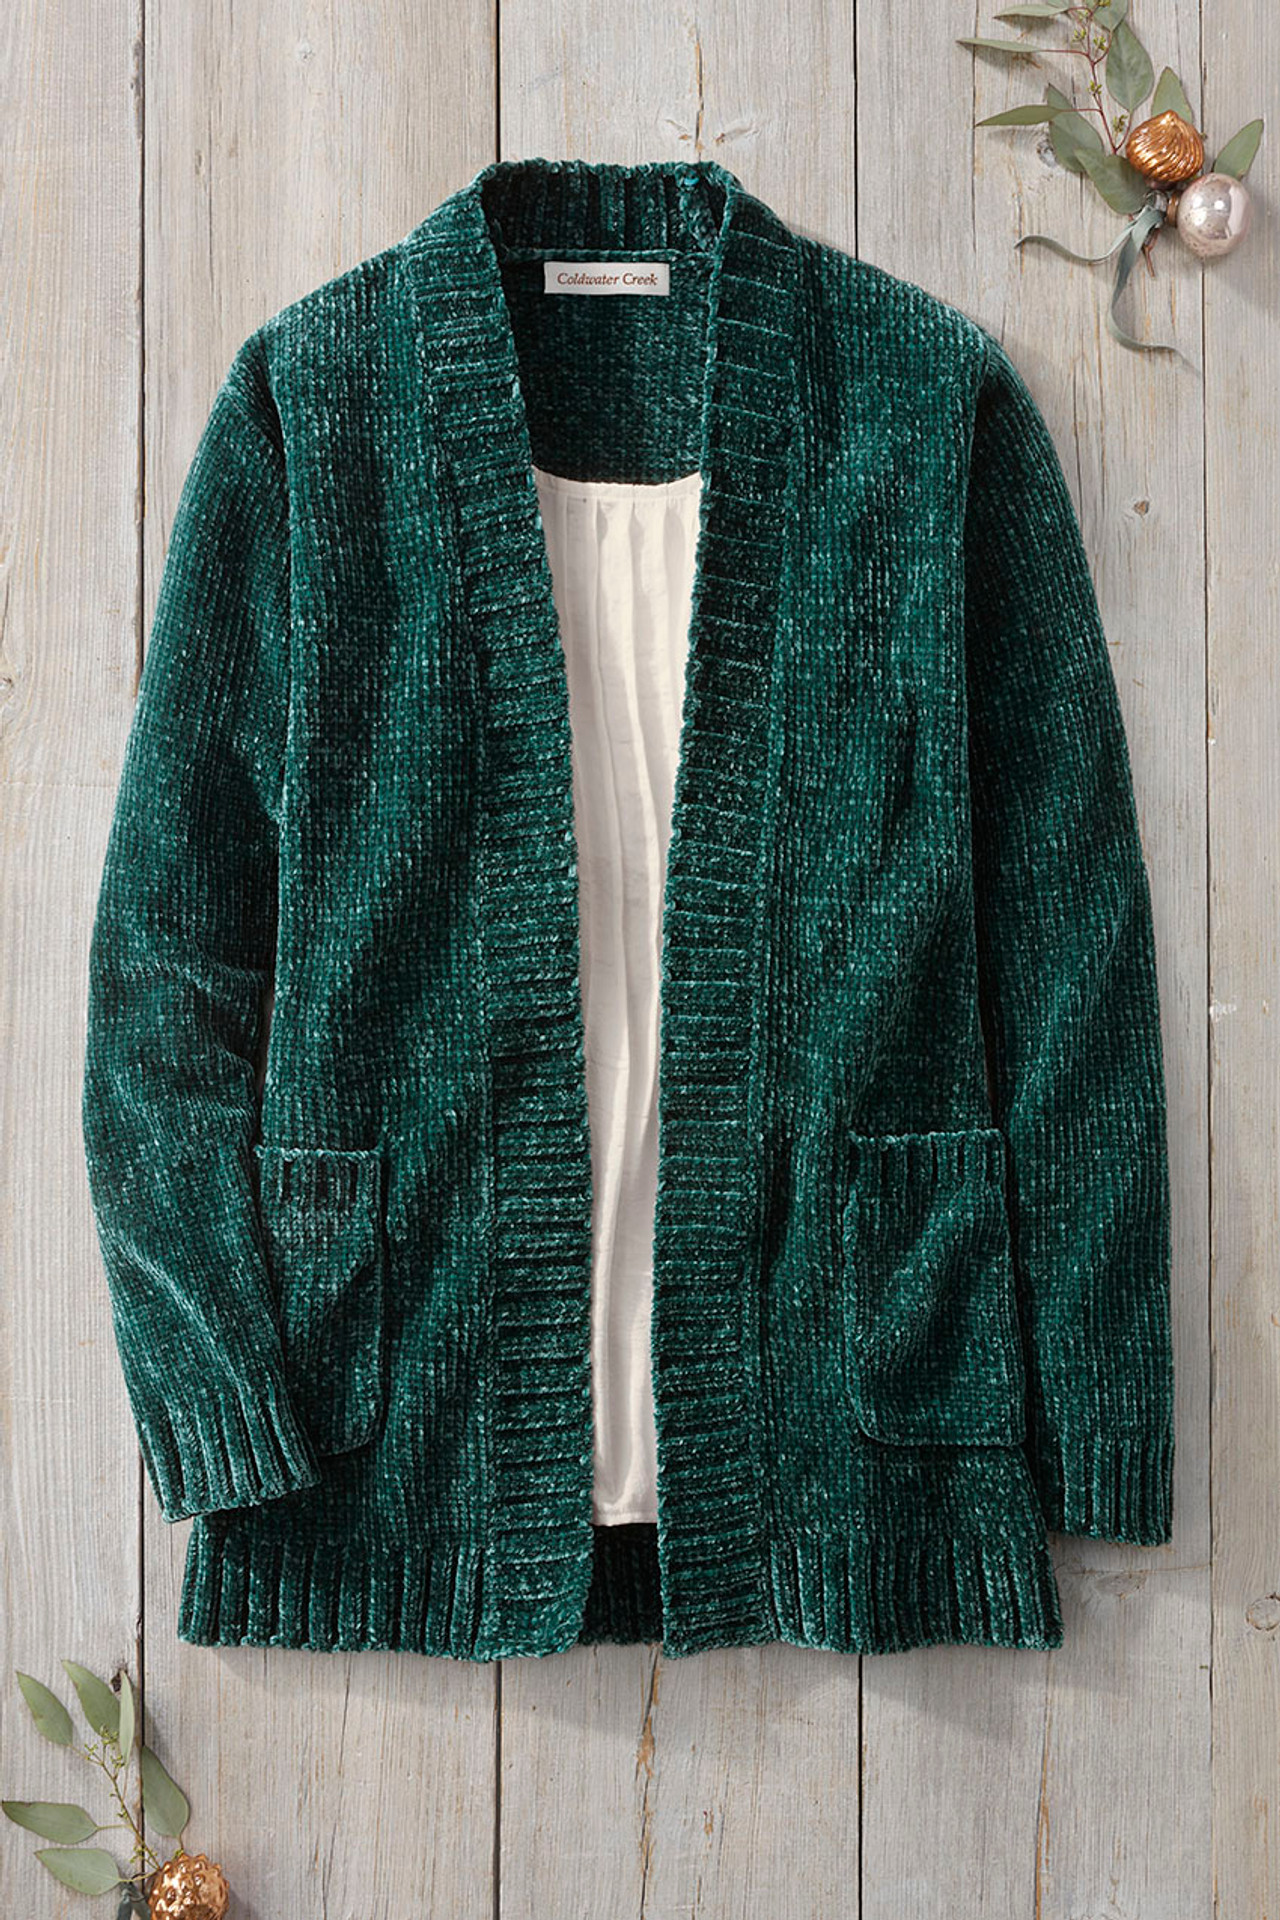 Twist of Teal Chenille Sweater - Coldwater Creek